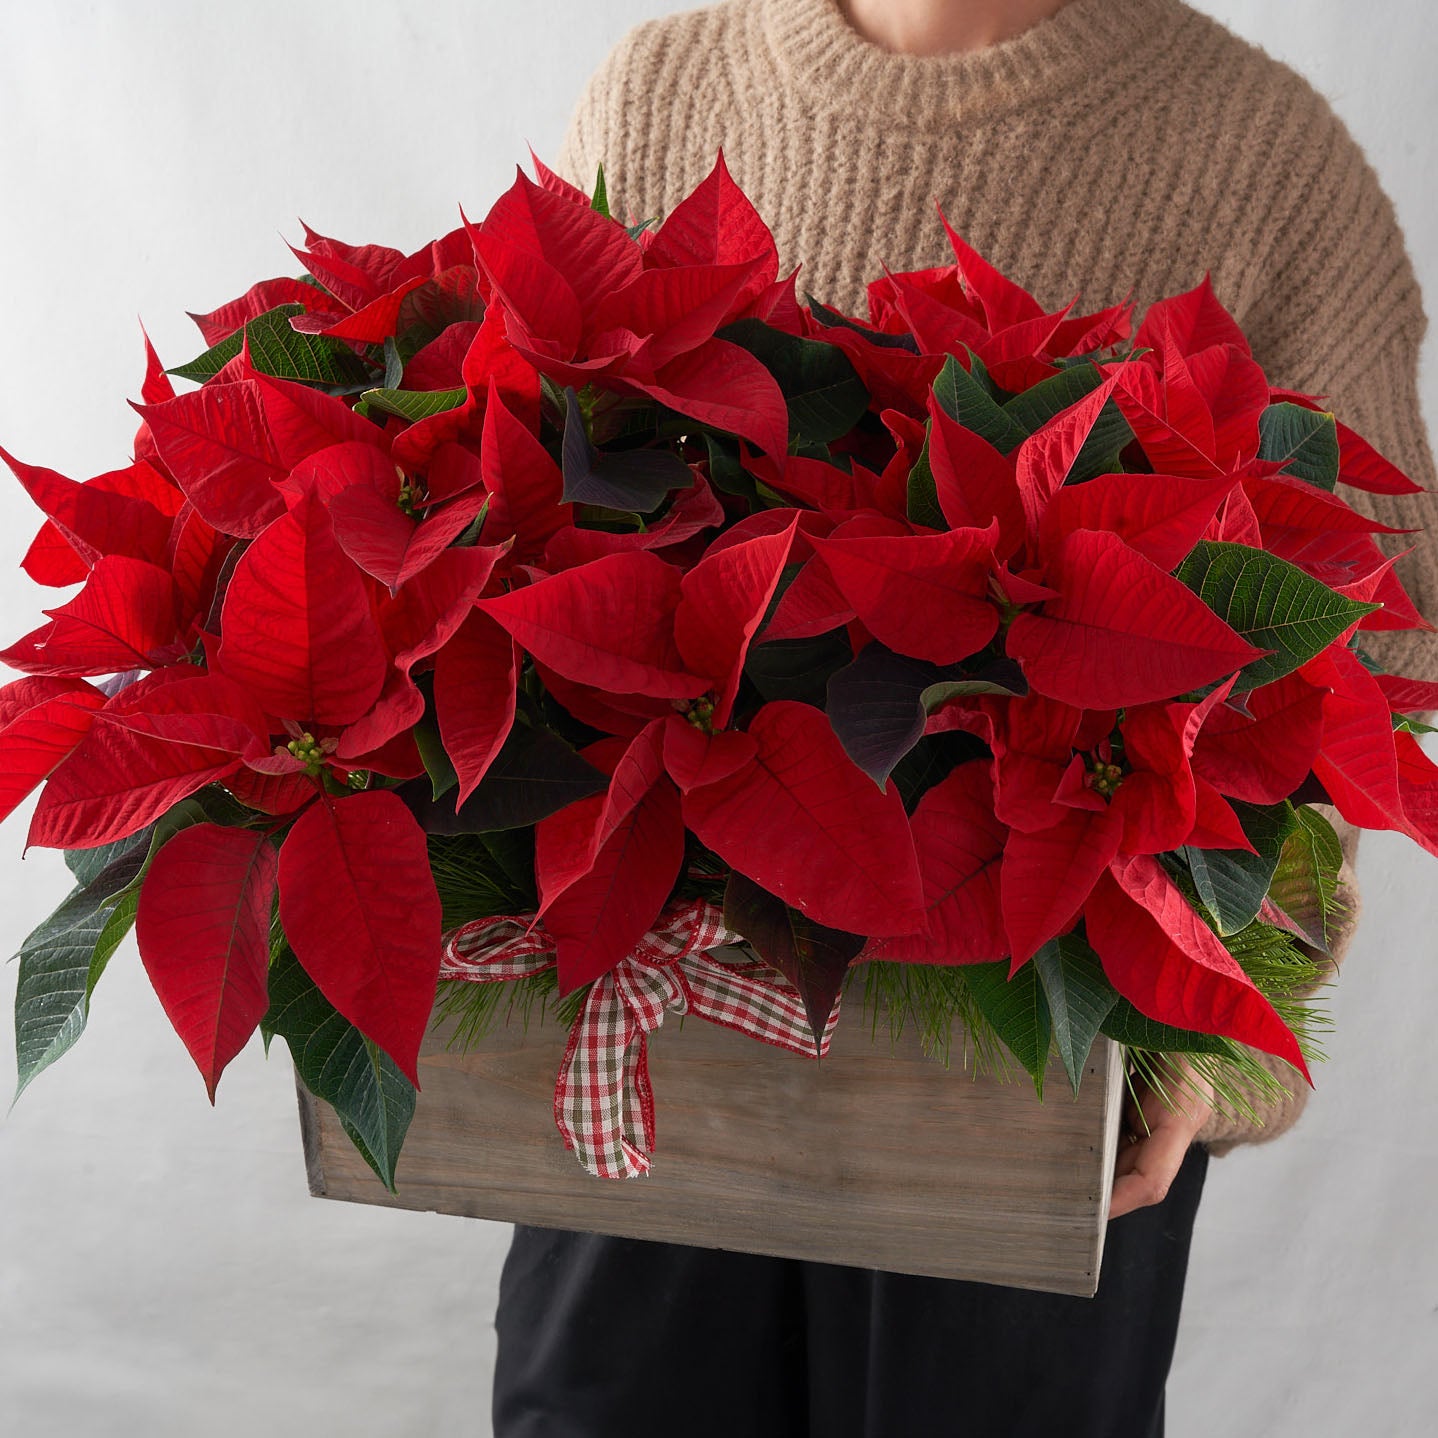 Person holding red poinsettia in a wooden box with pine boughs and a red and green bow.